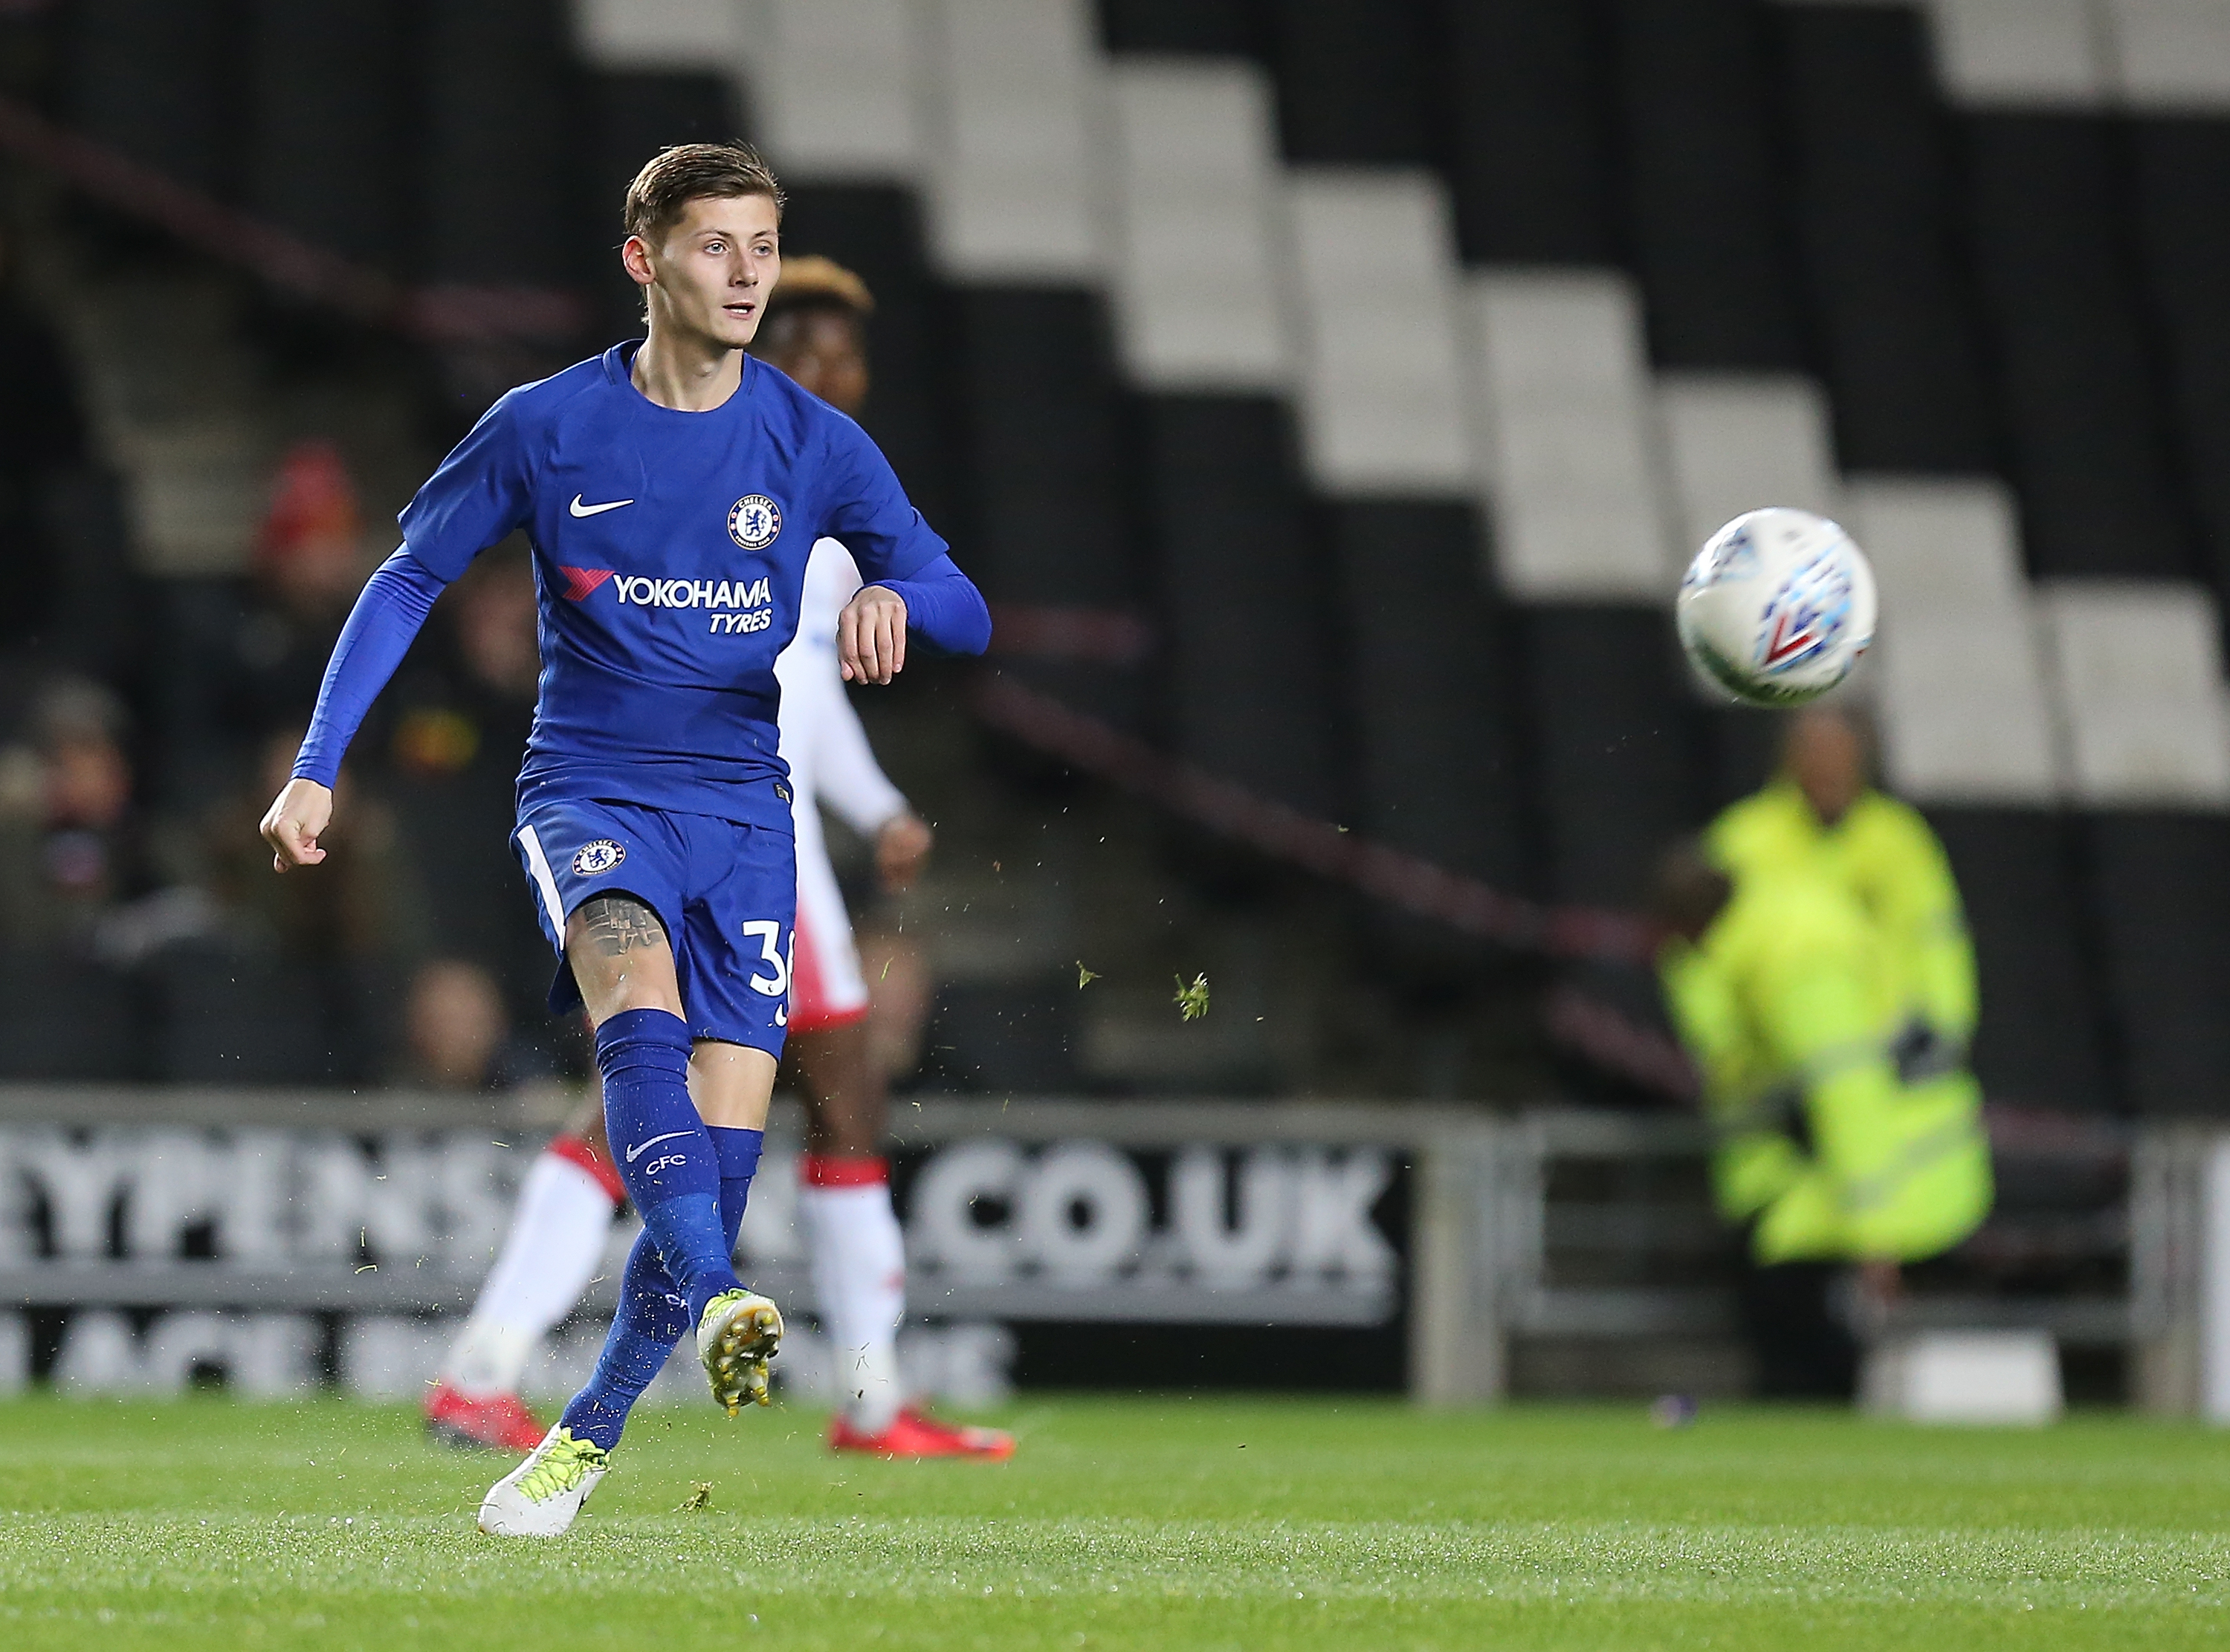 MILTON KEYNES, ENGLAND - DECEMBER 06:  Kyle Scott of Chelsea in action during the Checkatrade Trophy Second Round match between Milton Keynes Dons and Chelsea U21vat StadiumMK on December 6, 2017 in Milton Keynes, England.  (Photo by Pete Norton/Getty Images)